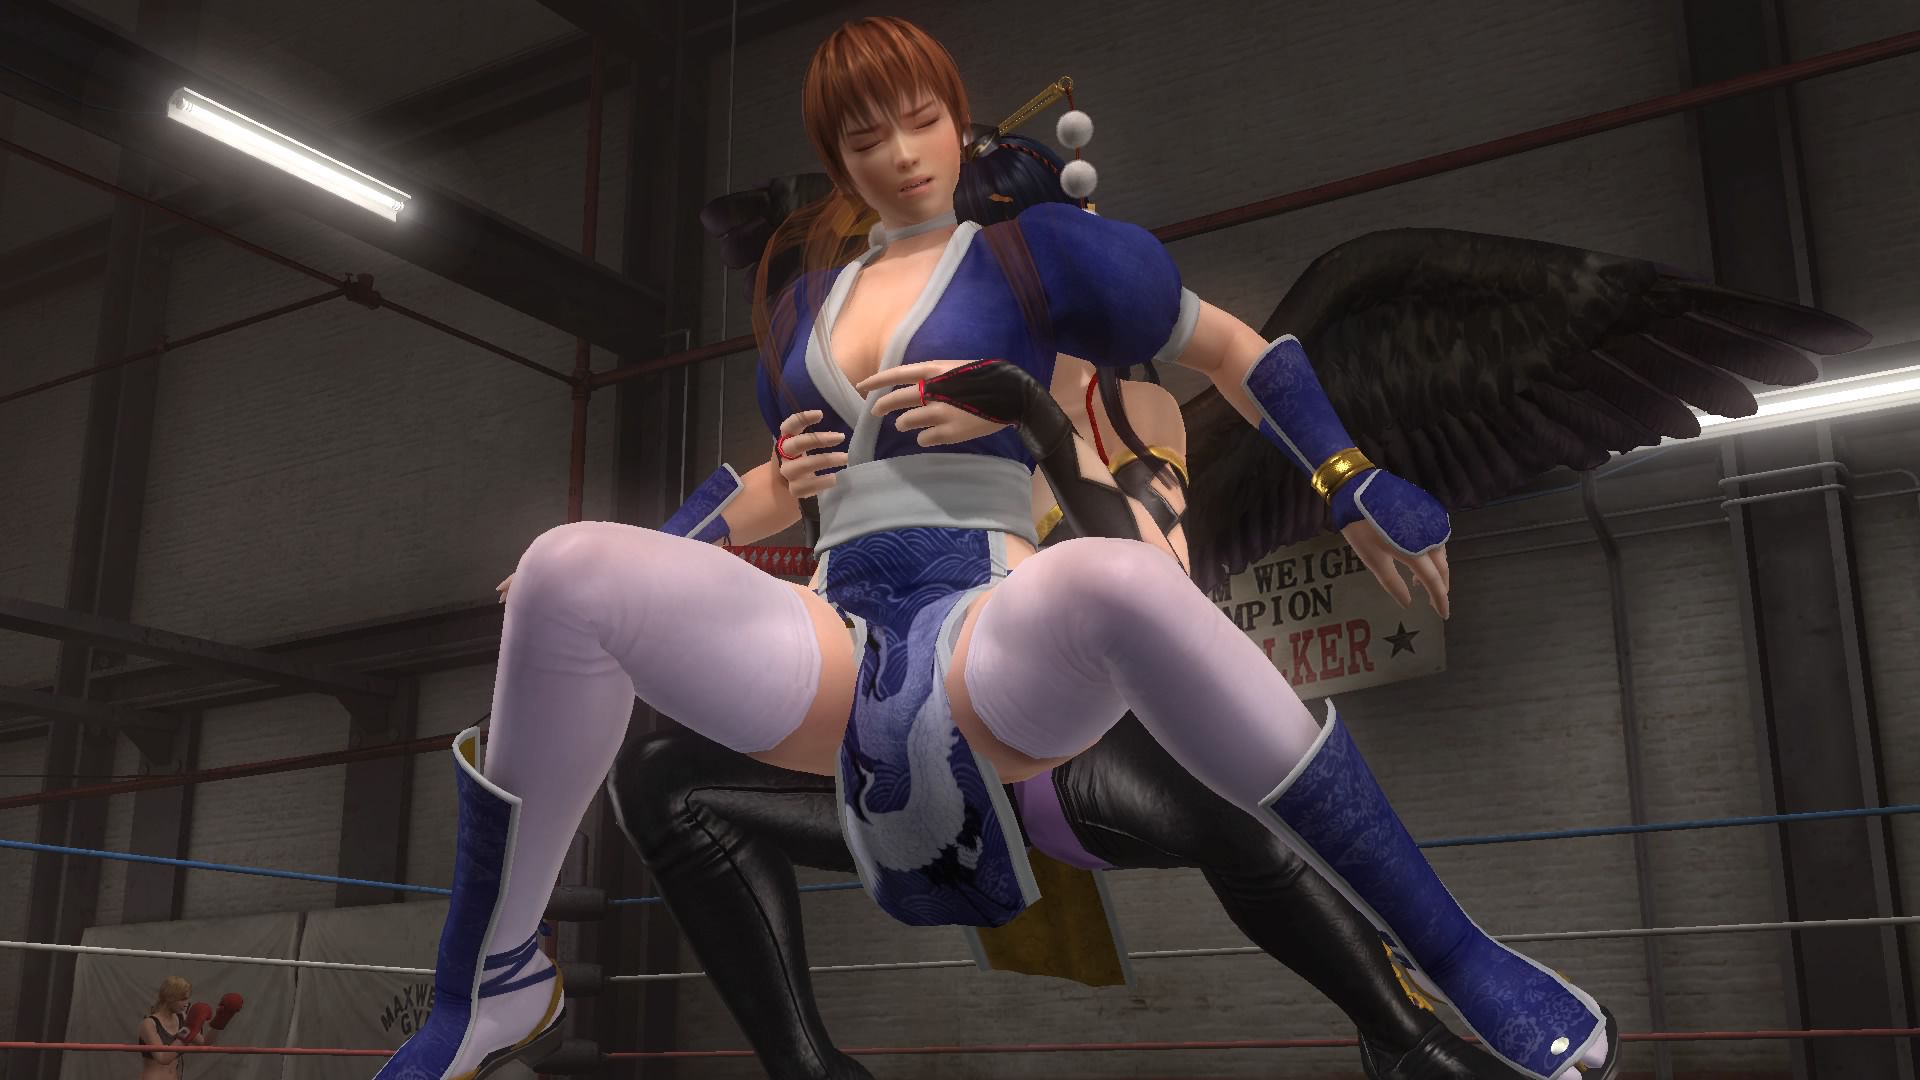 DOA5LR cheongsam delivery special! Elo slit not costume featured 10